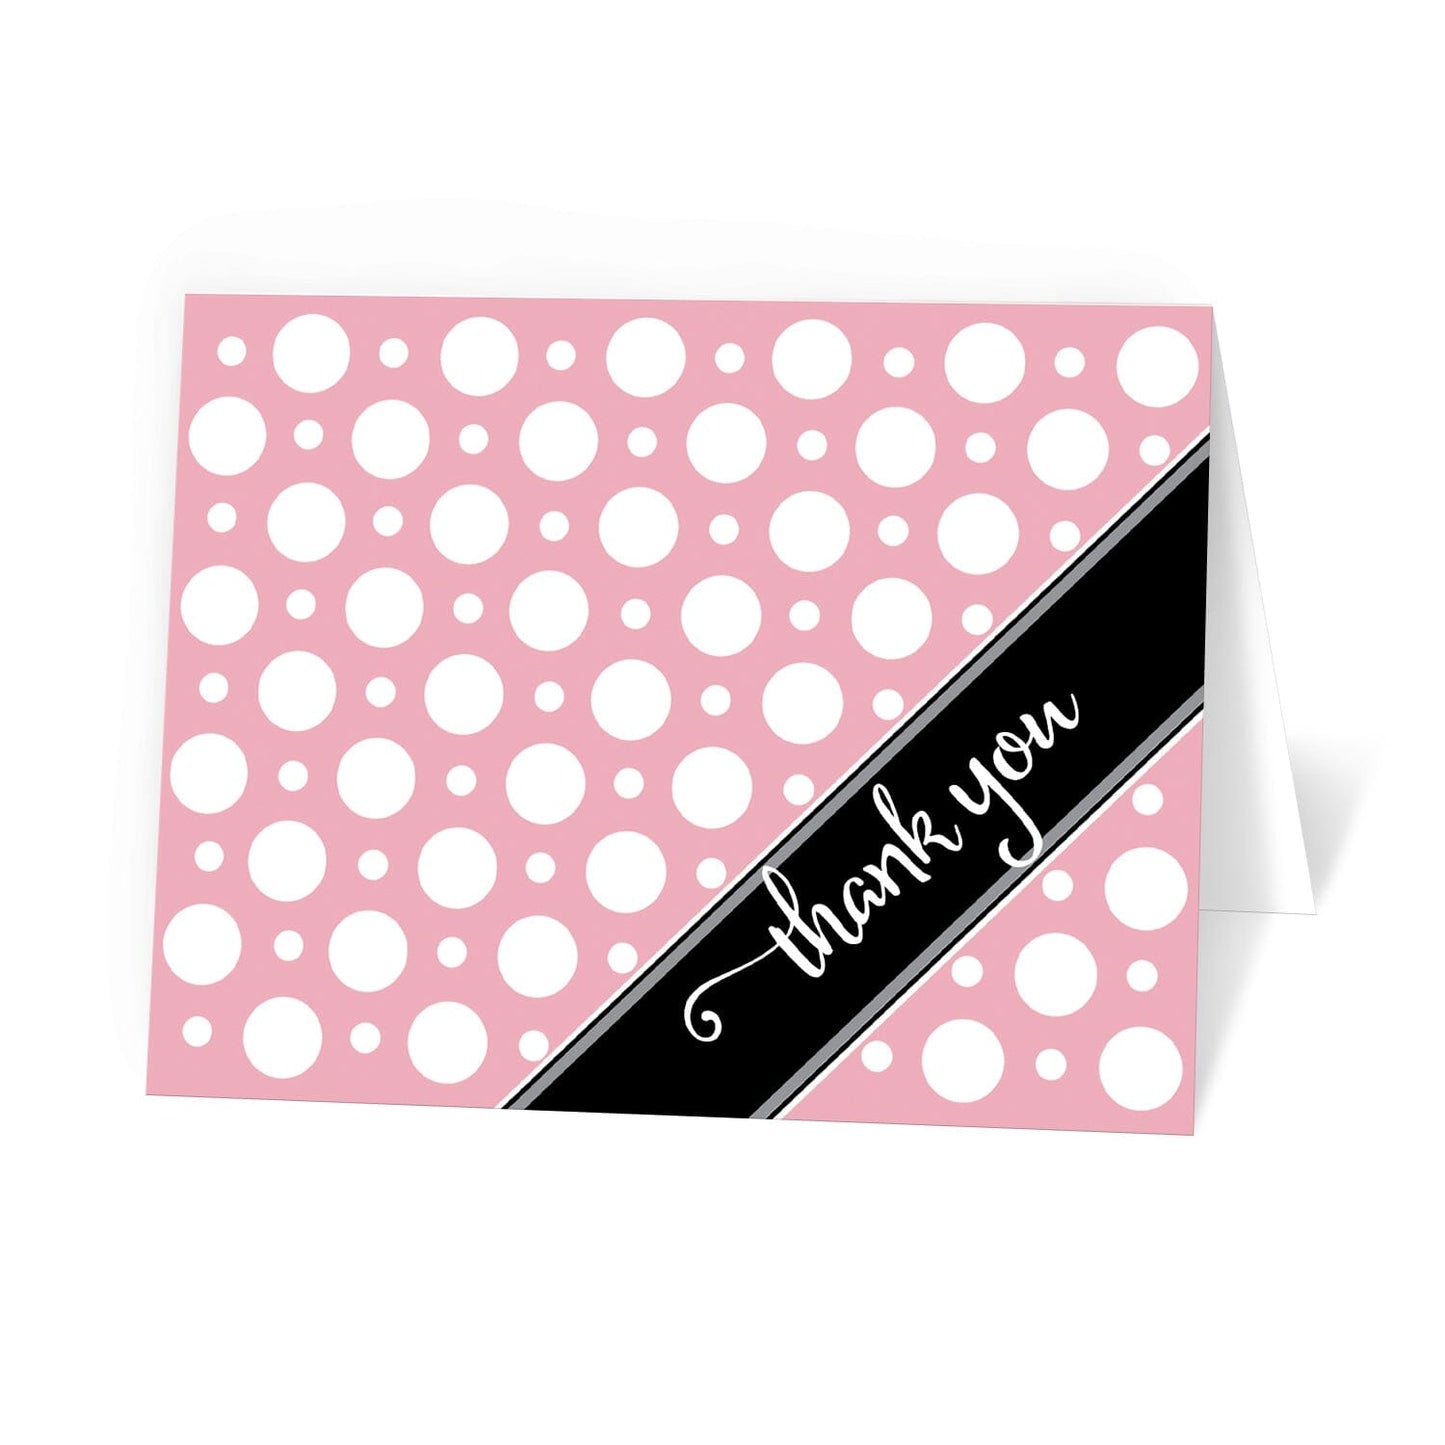 Cafe Pink Polka Dot Thank You Cards at Artistically Invited.